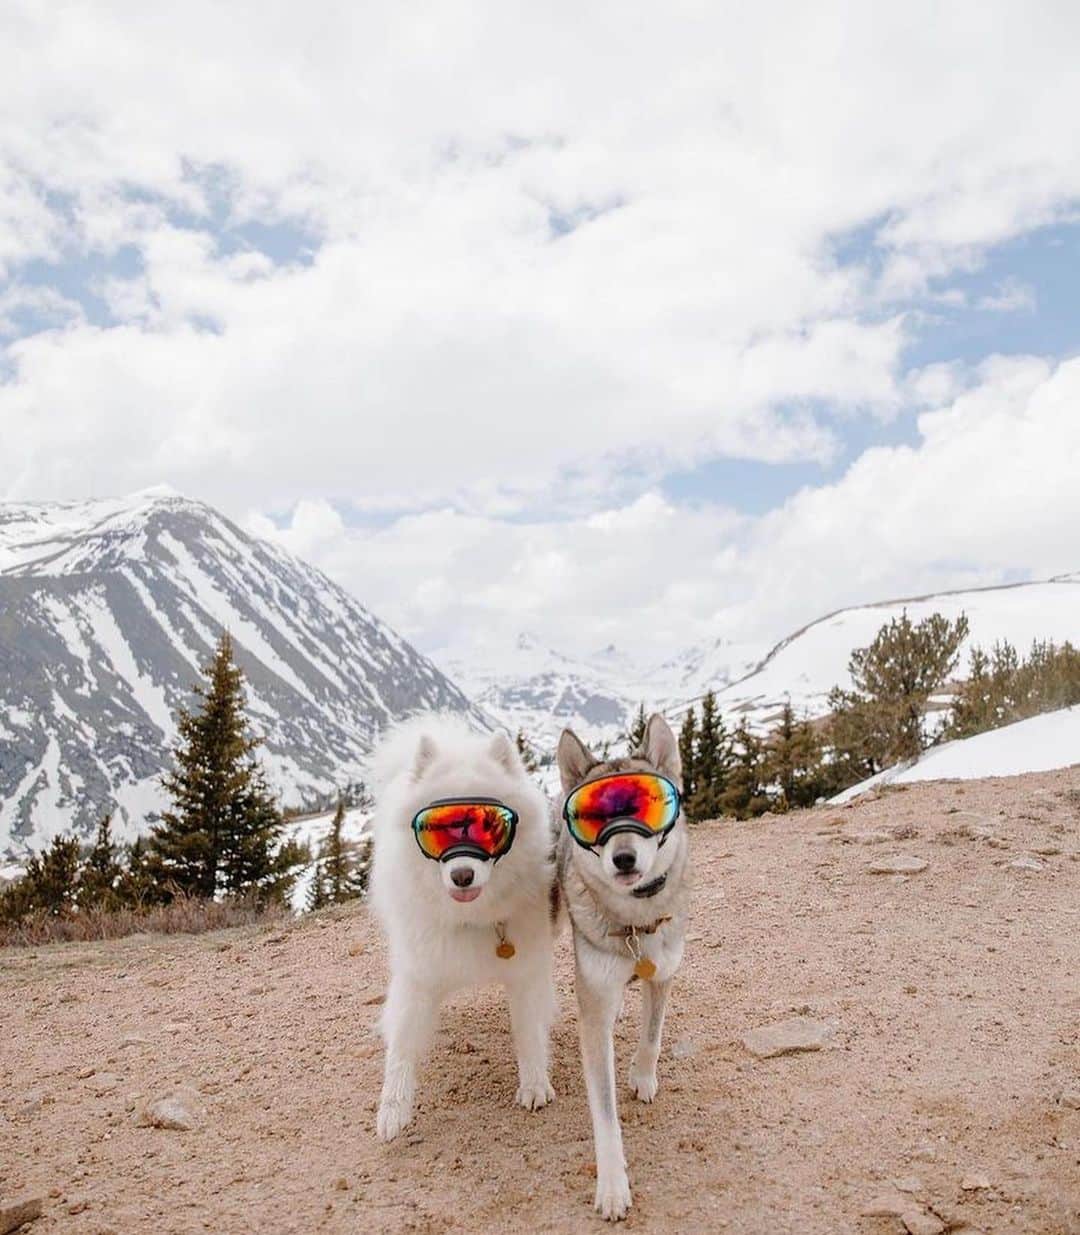 Bolt and Keelのインスタグラム：「Meet Atlas and North!🏔️ These two have traveled to some amazing places together!🏞️  @adventrapets ➡️ @ournorthernworld  —————————————————— Follow @adventrapets to meet cute, brave and inspiring adventure pets from all over the world! 🌲🐶🐱🌲  • TAG US IN YOUR POSTS to get your little adventurer featured! #adventrapets ——————————————————」